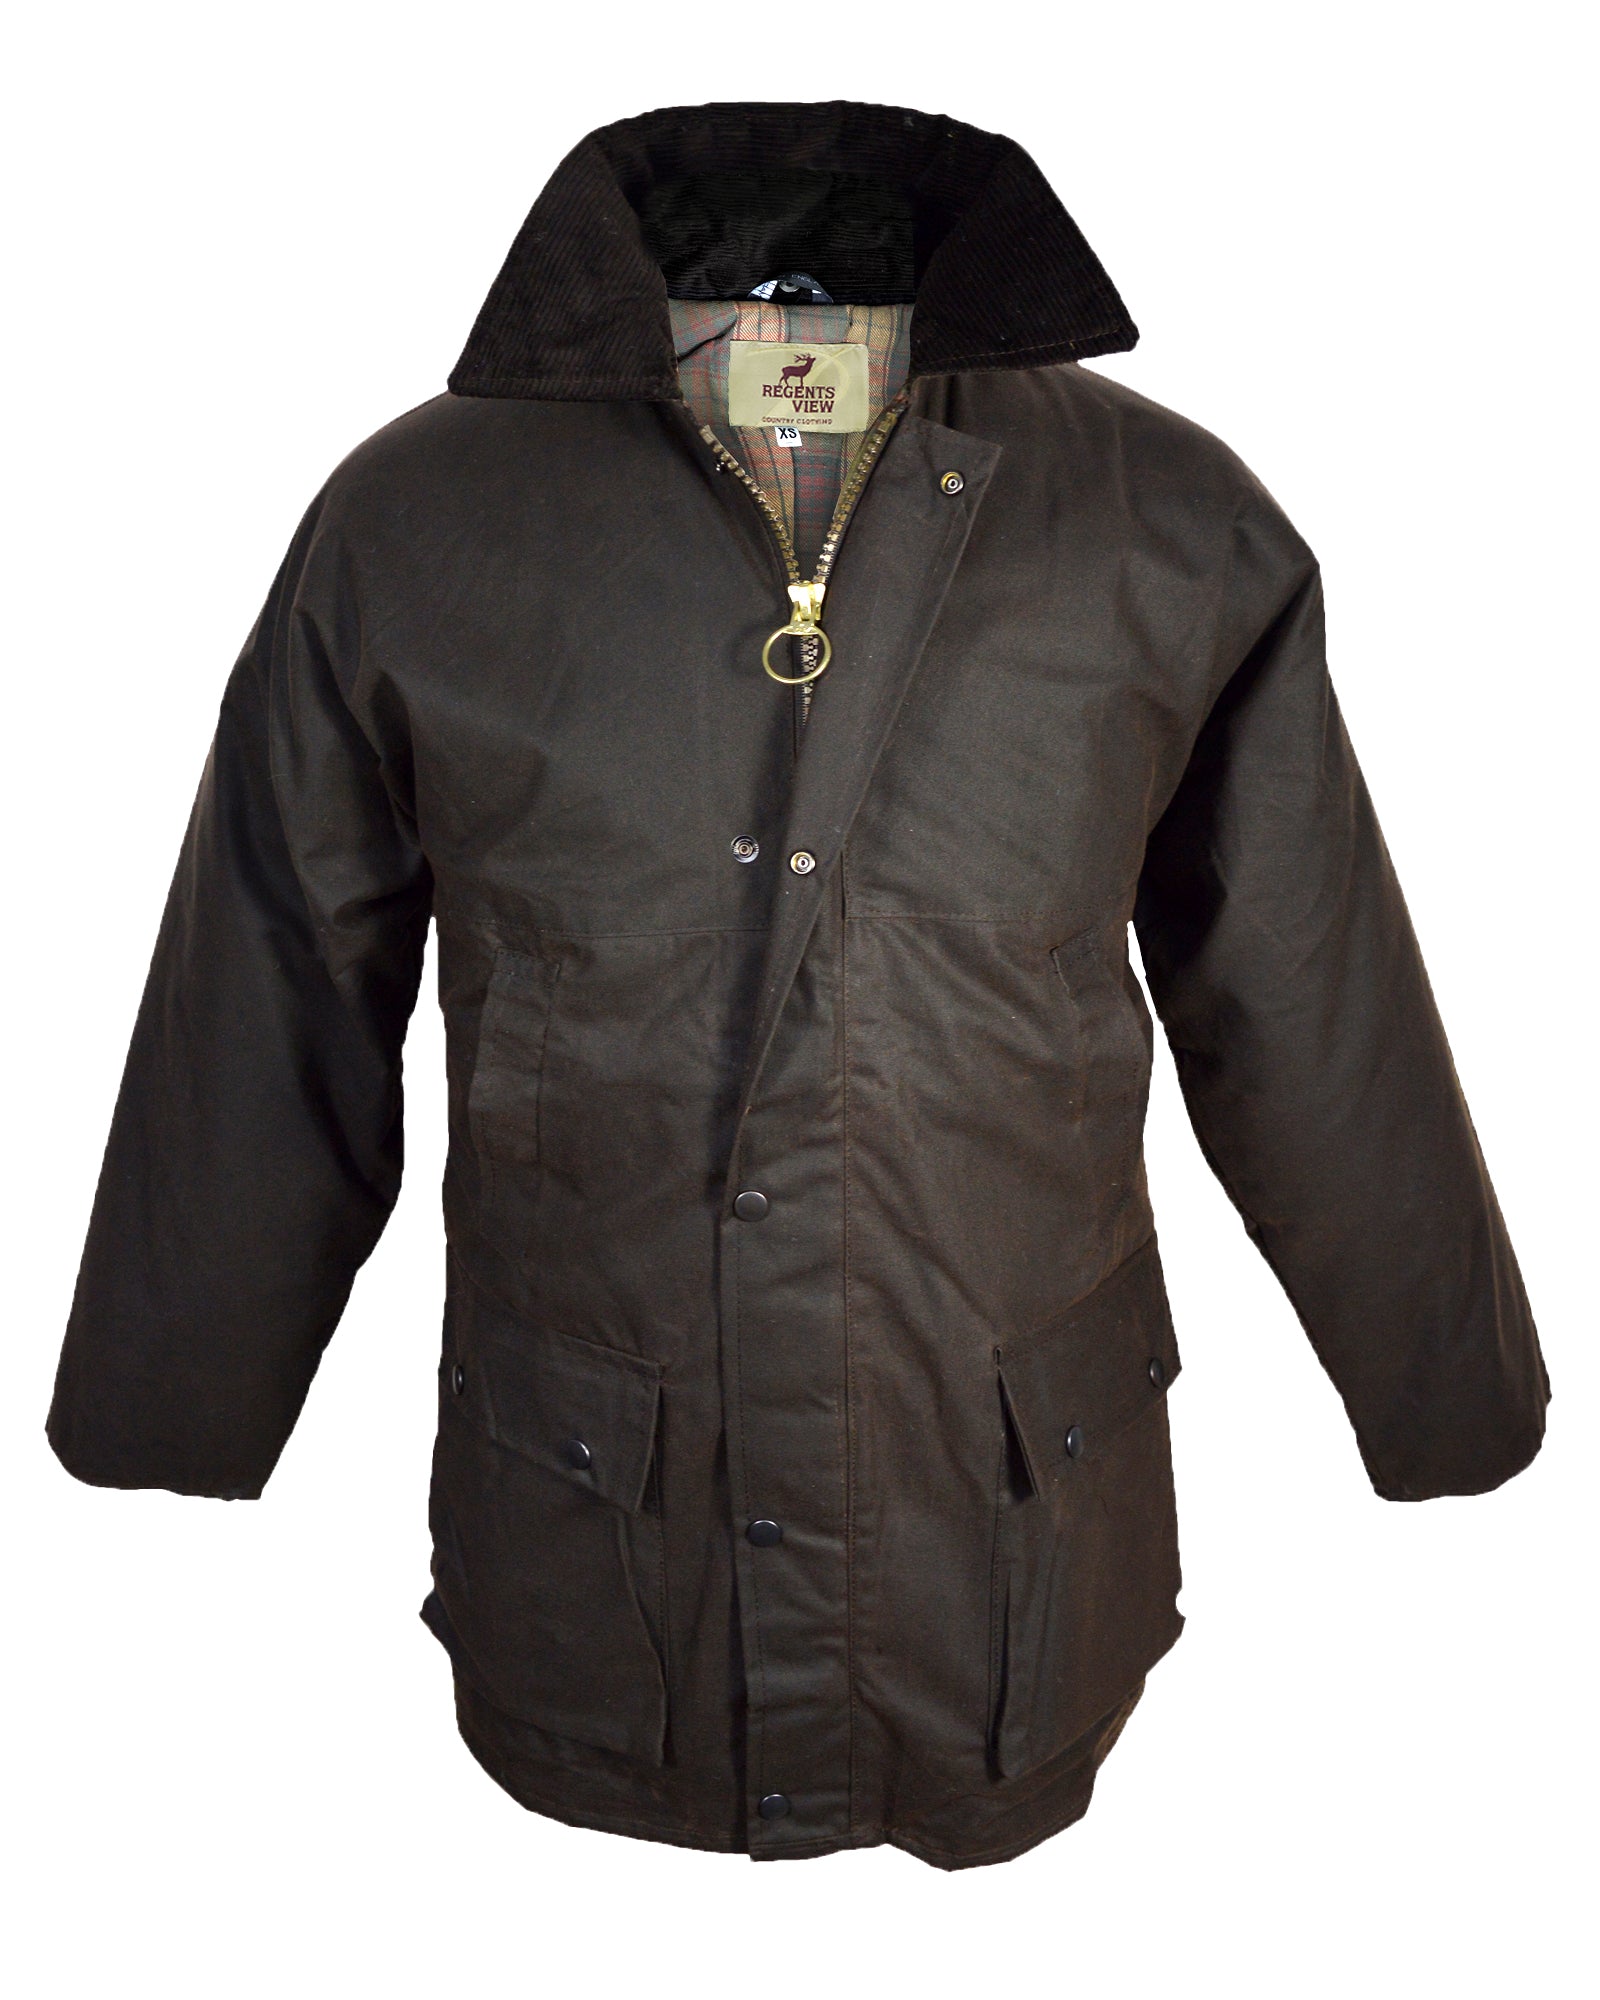 Regents View Padded Waxed Cotton Jacket - Brown – Midlandsclothing